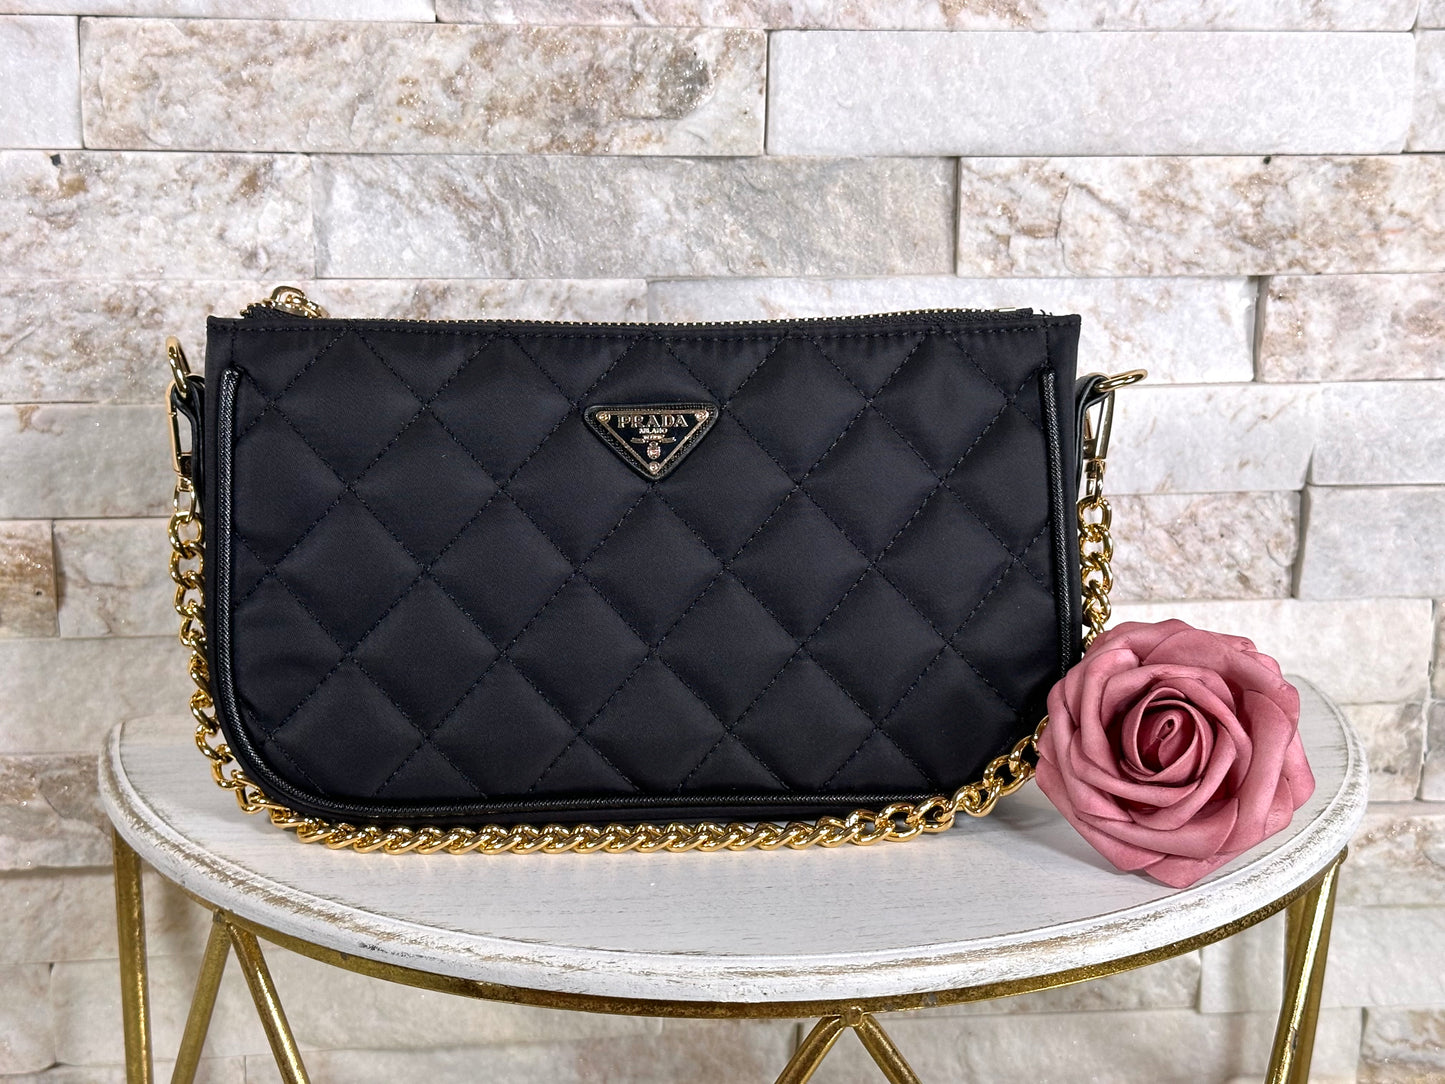 Mirror Bags- Small Black Quilted Pra Bag